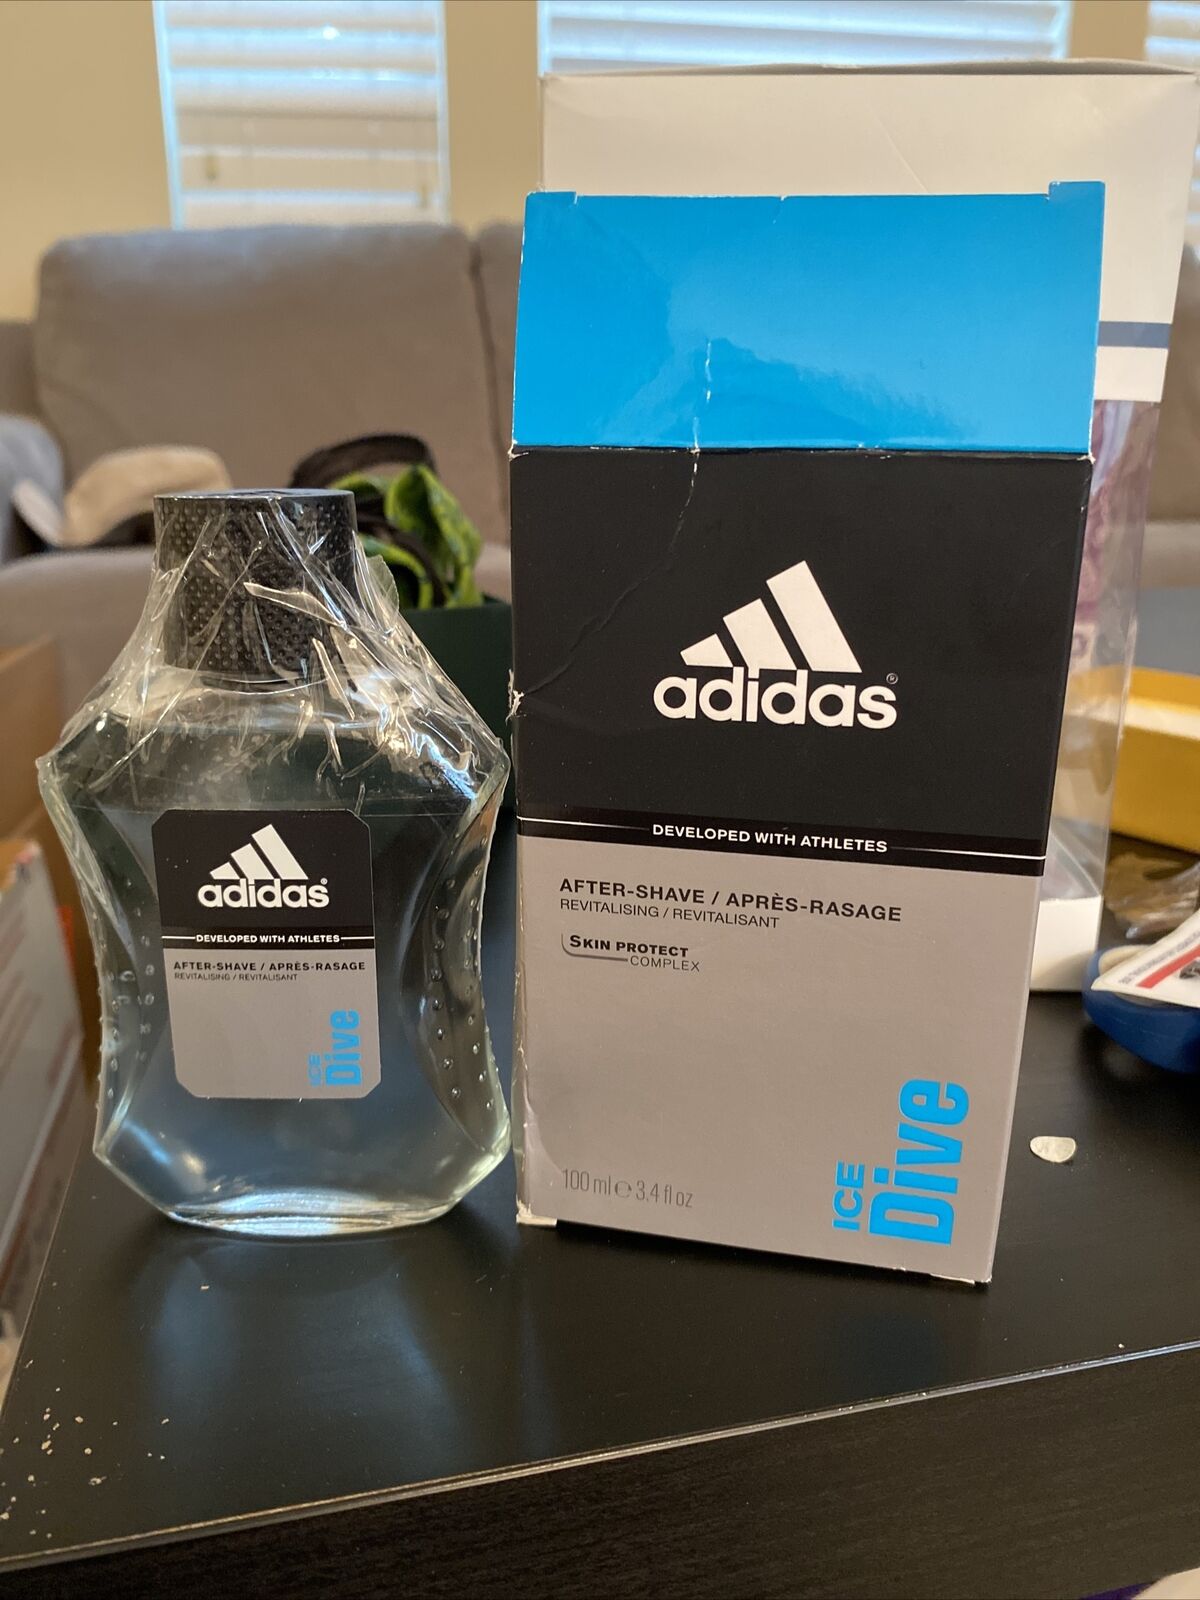 Adidas Ice Dive 3.4 oz After Shave Splash For Men 100ml Brand New With Box Homme